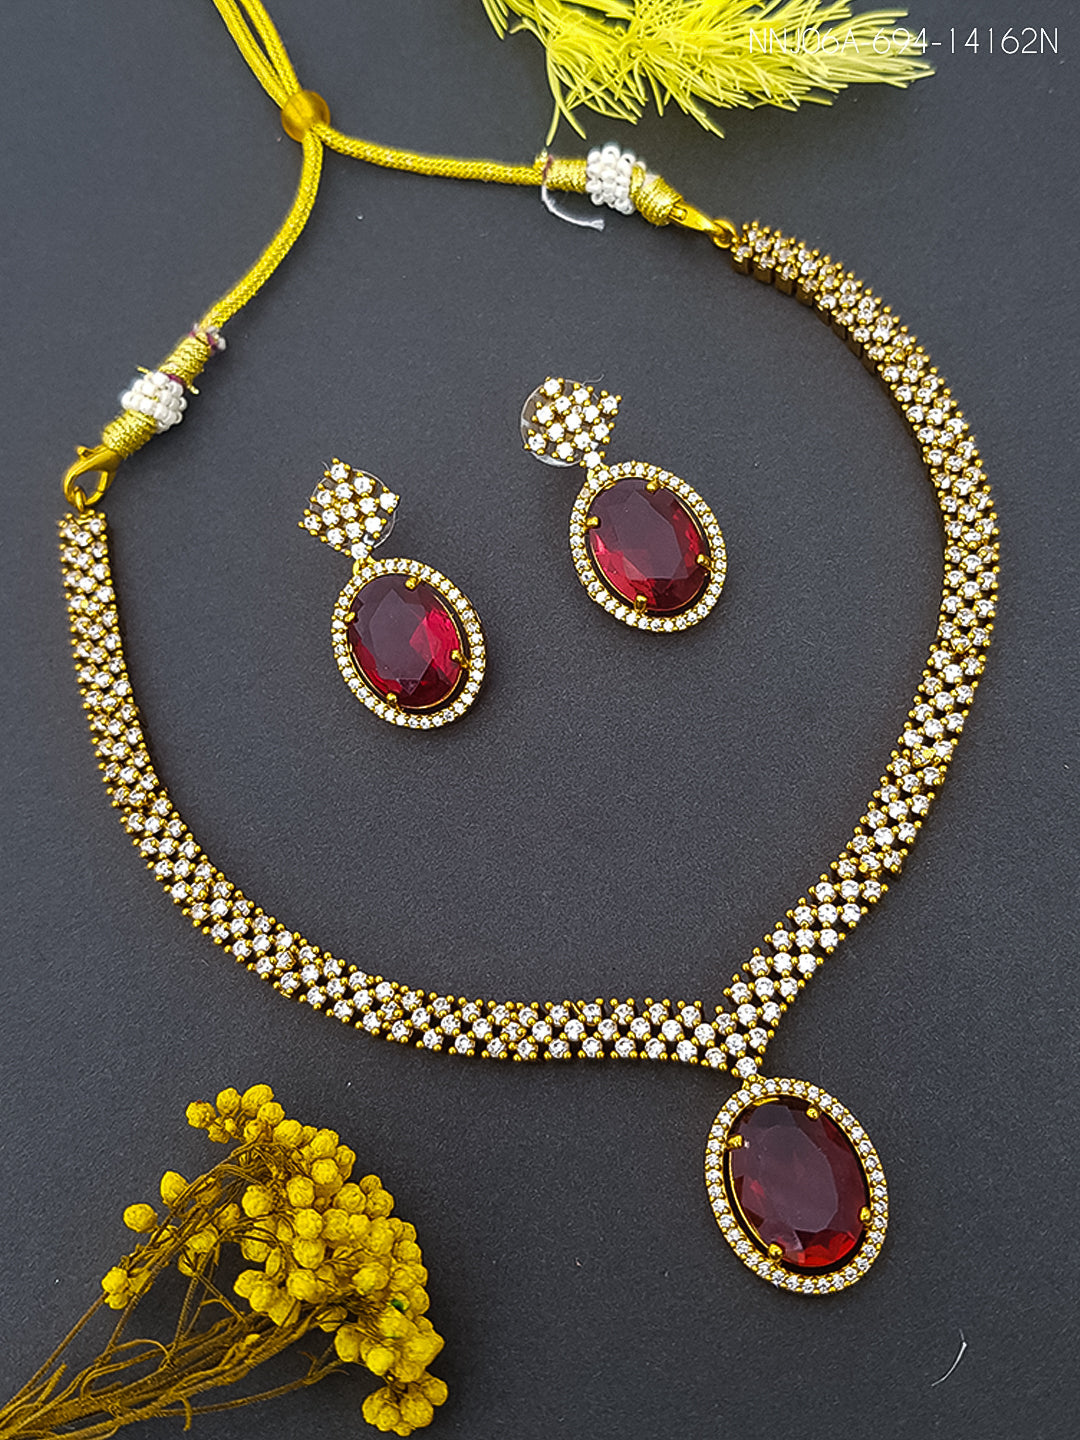 Gold Plated Drop CZ Necklace Set with monalisa stone 14162N